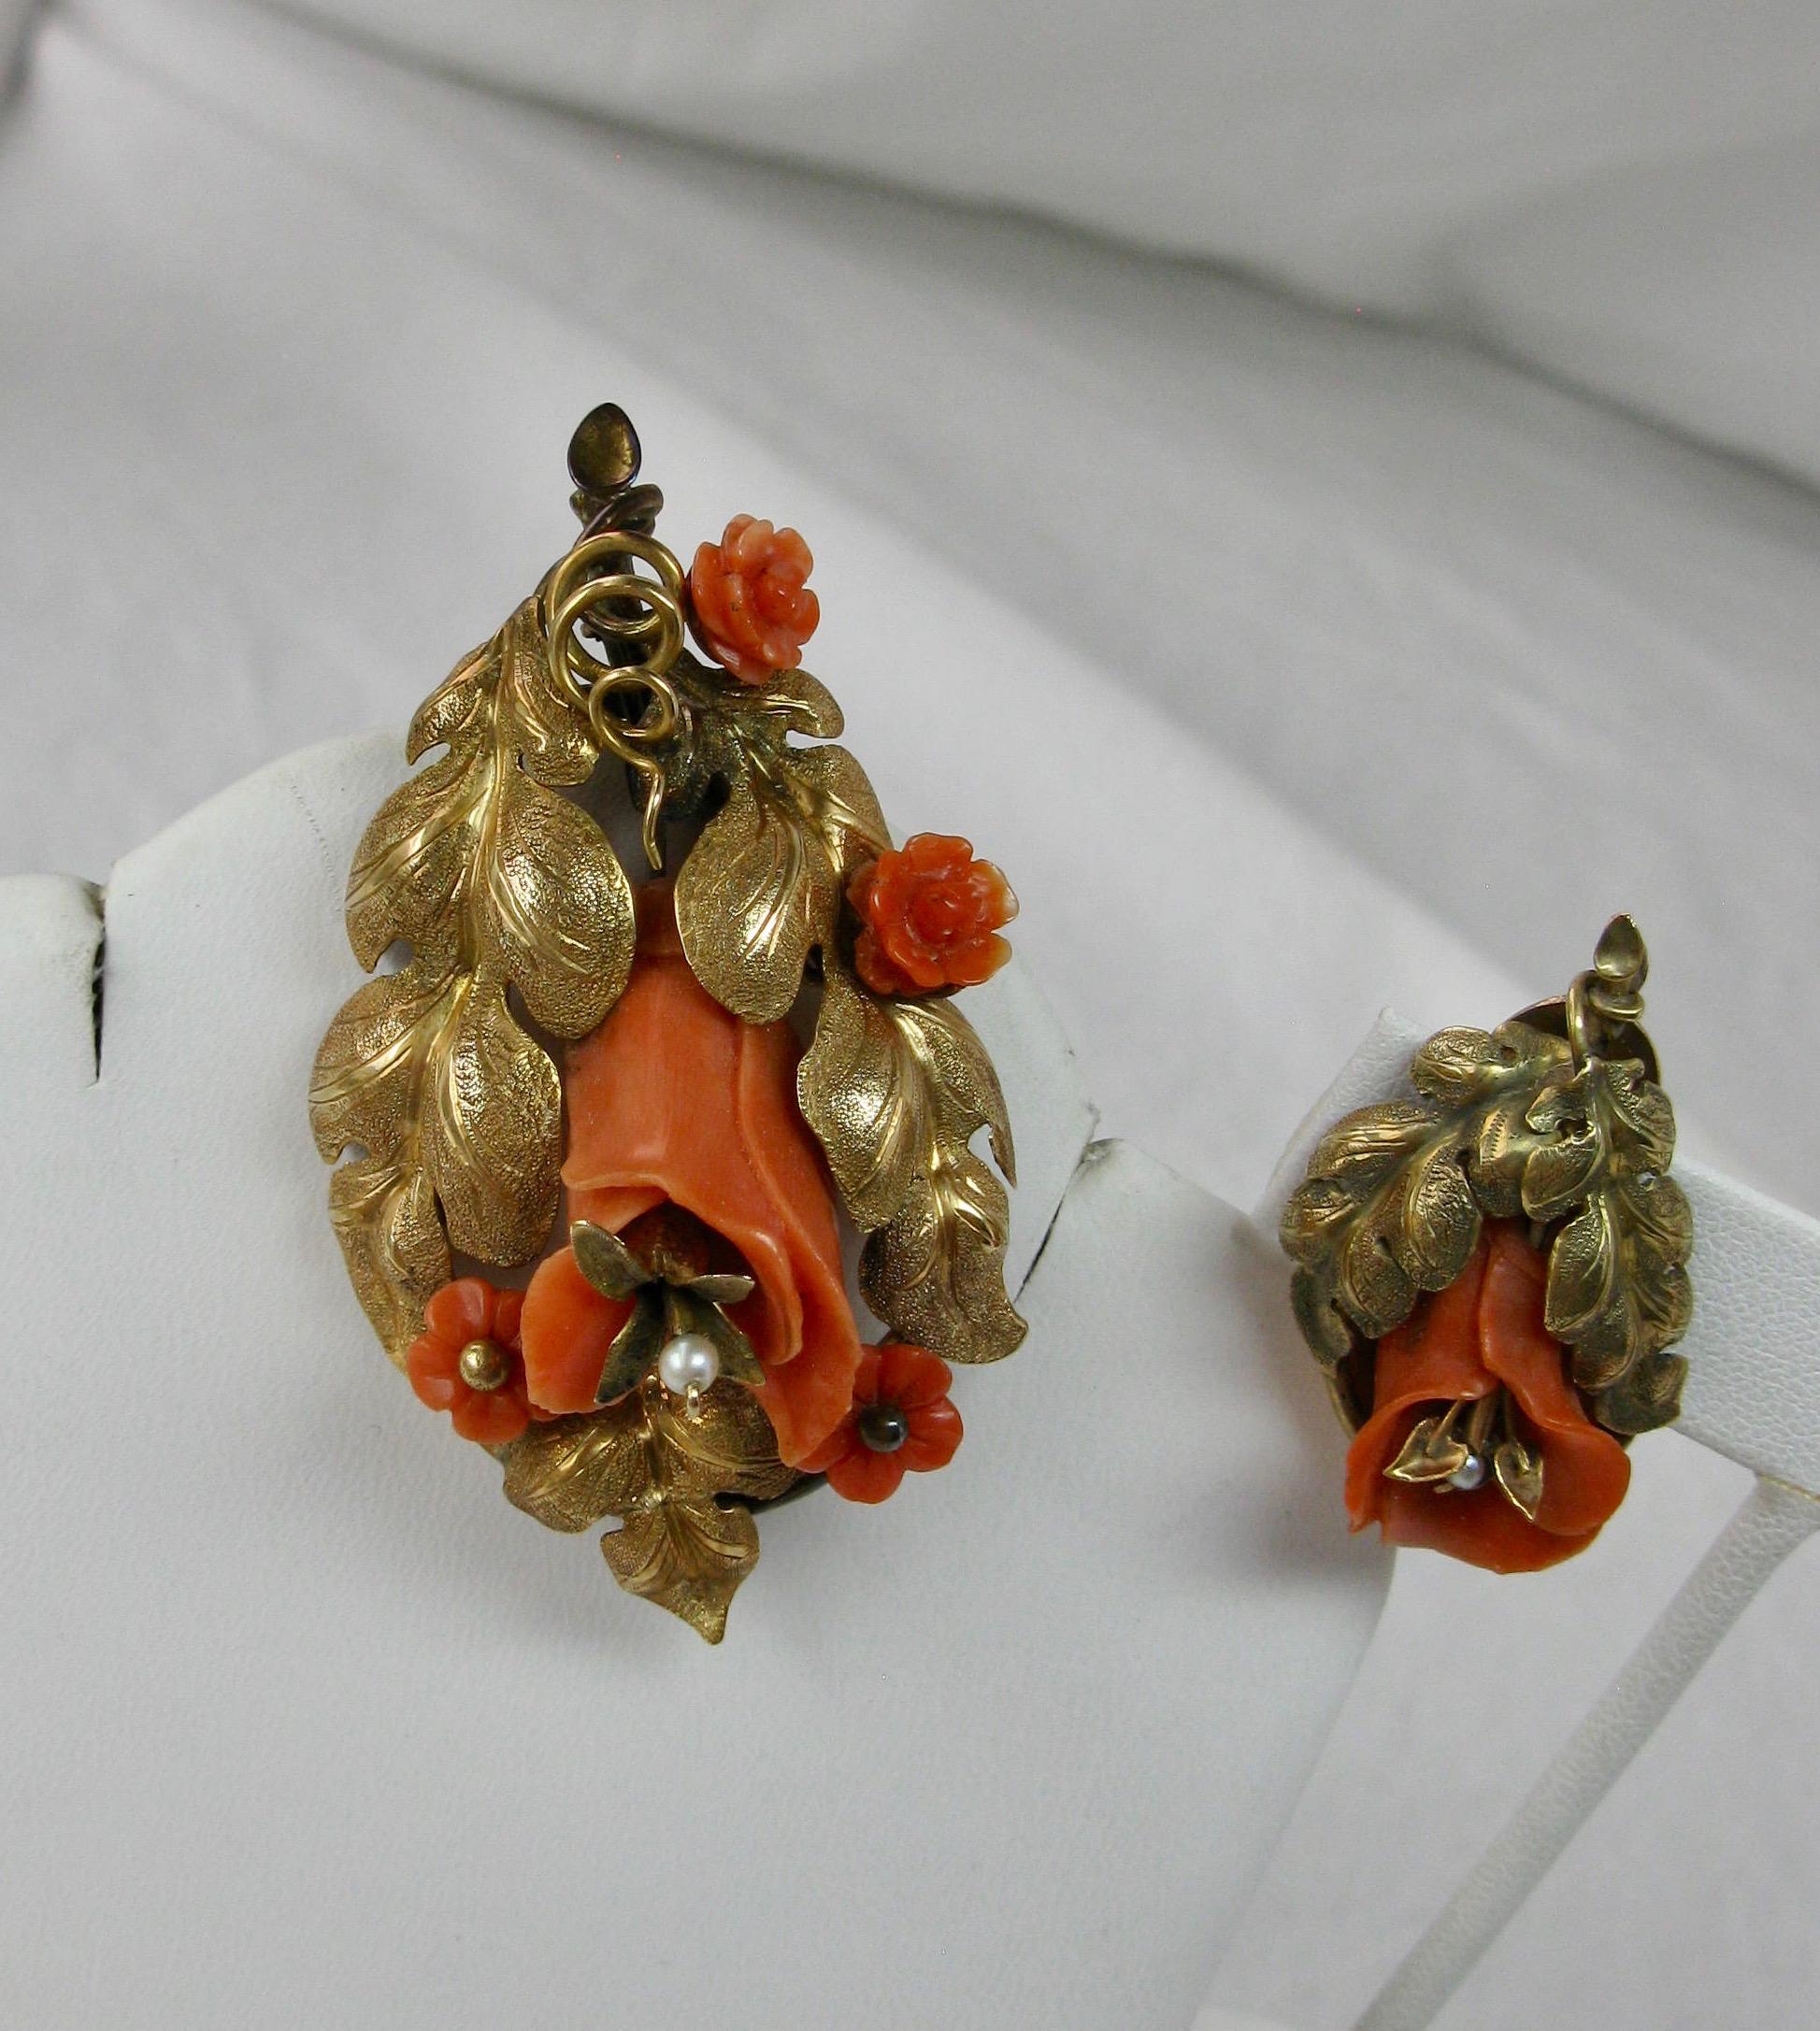 Mixed Cut Victorian Coral Earrings And Brooch Flower Leaf Motif 14 Karat Gold Circa 1870 For Sale